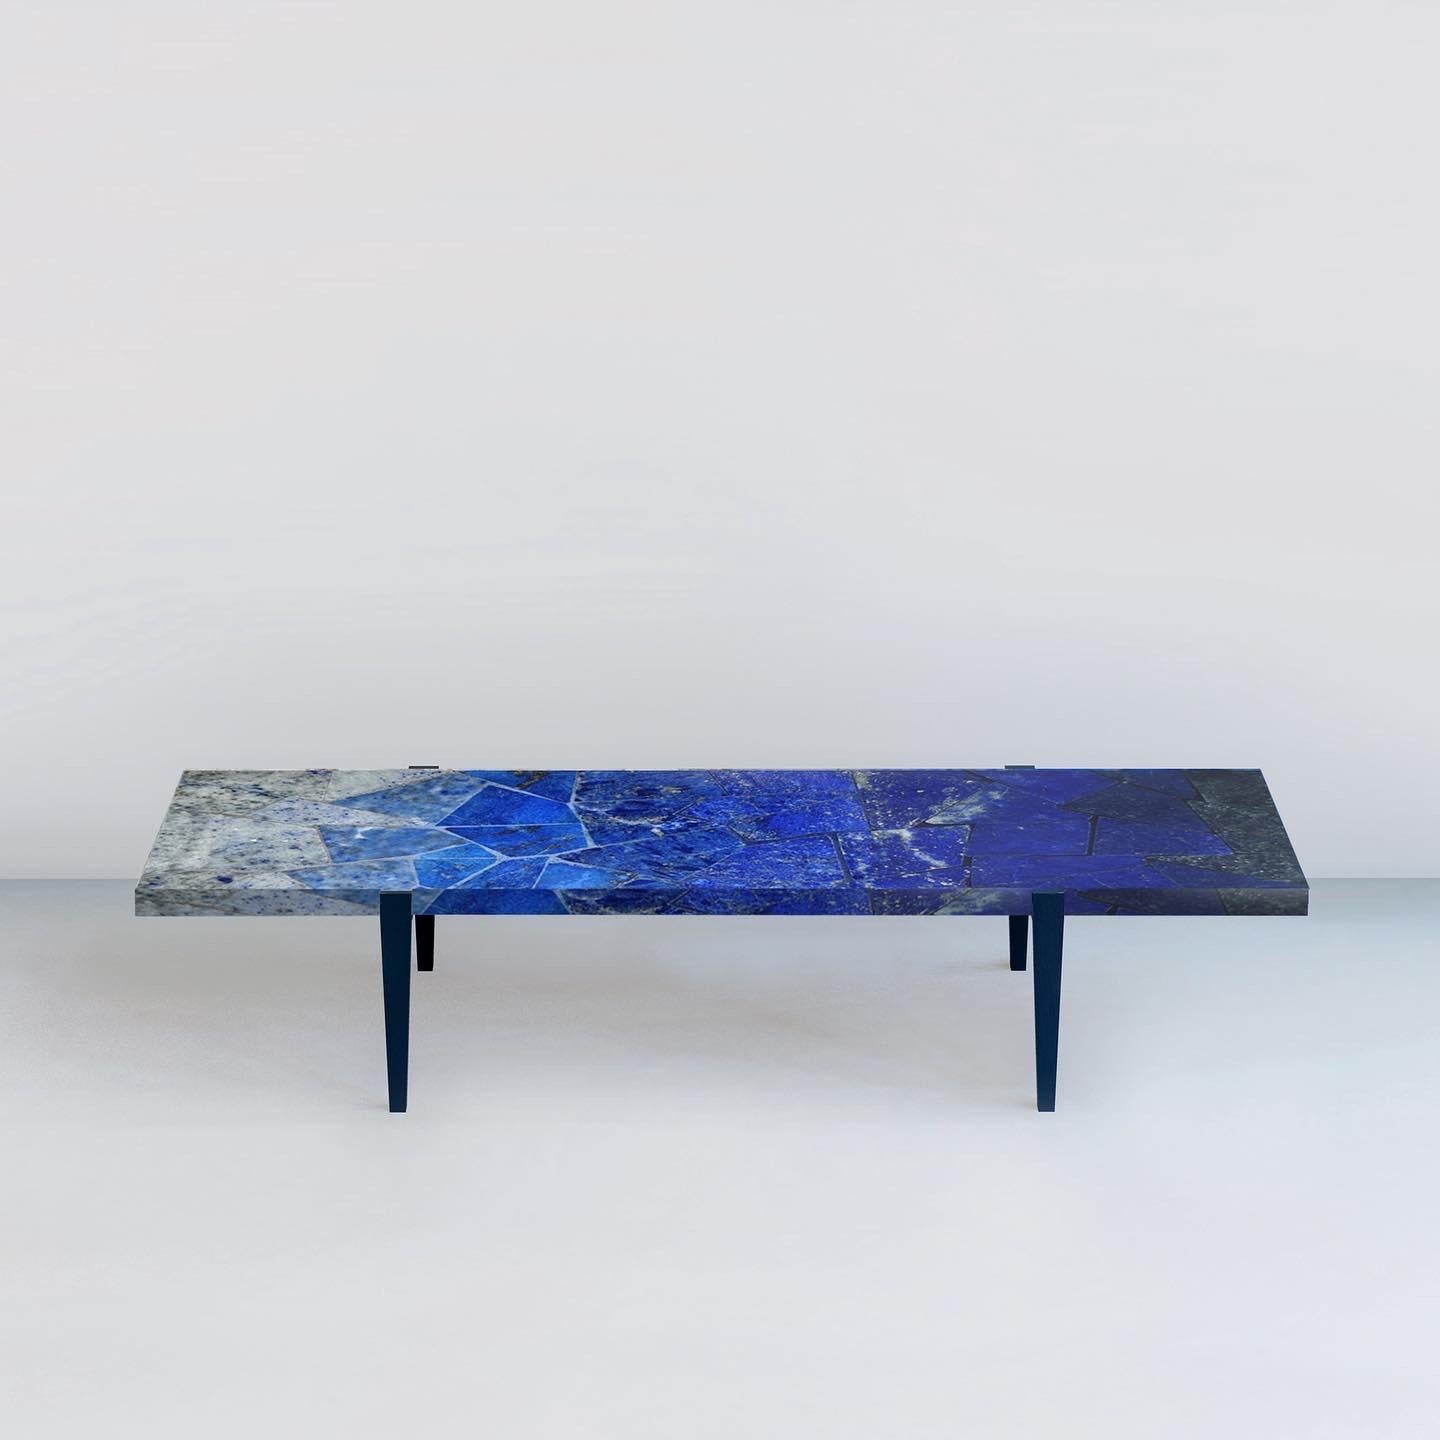 Topaa'nga I table by Studio Lel
Dimensions: W 183 x D 61 x H 35.5 cm
Materials: Lapis Lazuli, Granite, Metal

These are handmade from semiprecious stone and marble in a small artisanal workshop. Please note that variations and slight